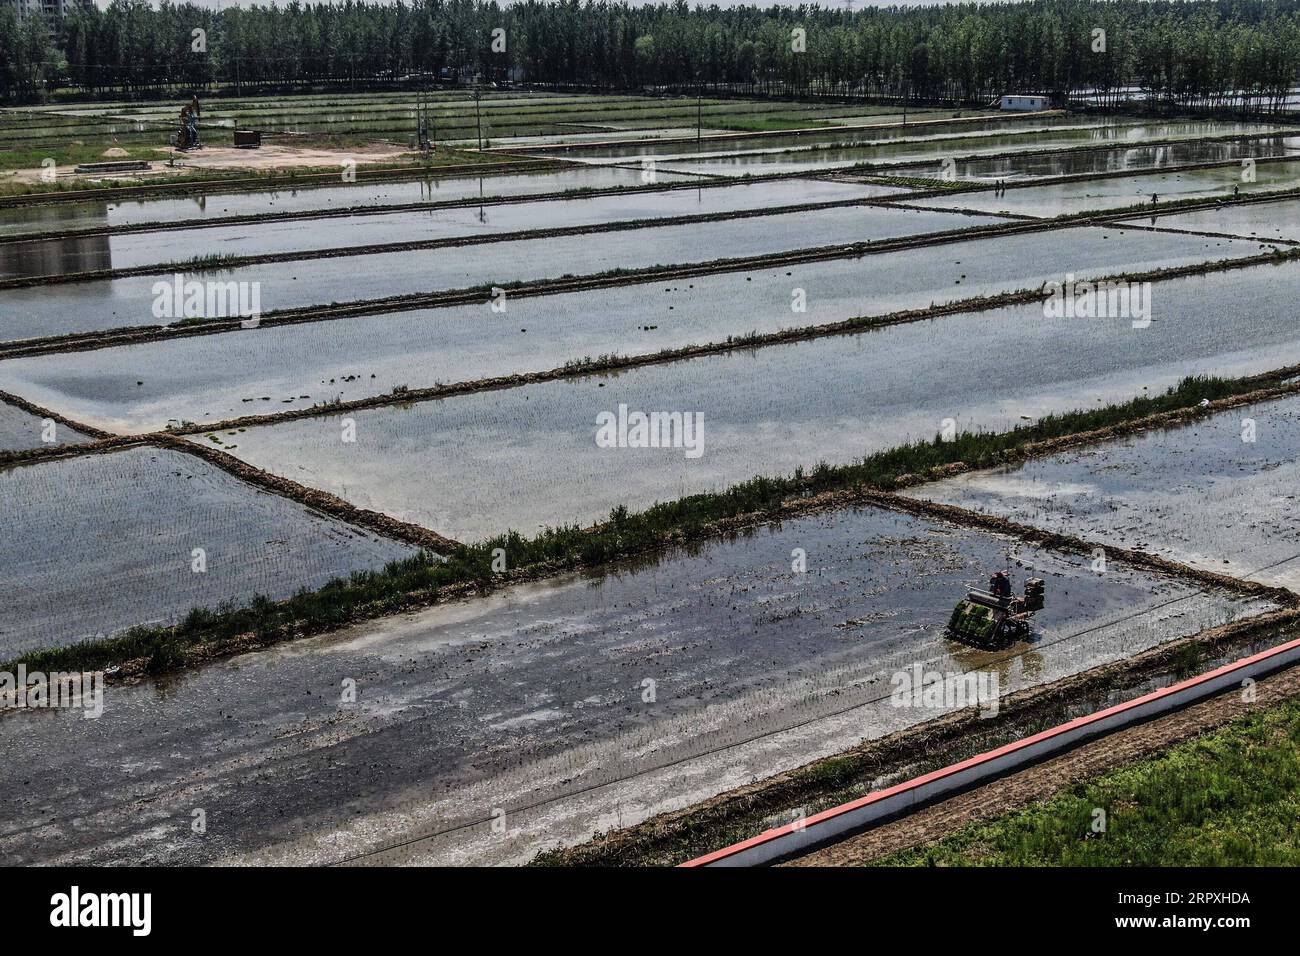 200524 -- PANJIN, May 24, 2020 -- A transplanter works to plant rice seedlings in Dawa District in Panjin City, northeast China s Liaoning Province, May 24, 2020. Rice transplanting of over 1.59 million mu about 106,000 hectares paddy fields in Panjin, the main rice producing area in Liaoning, has started recently.  CHINA-LIAONING-RICE-TRANSPLANTING CN PanxYulong PUBLICATIONxNOTxINxCHN Stock Photo